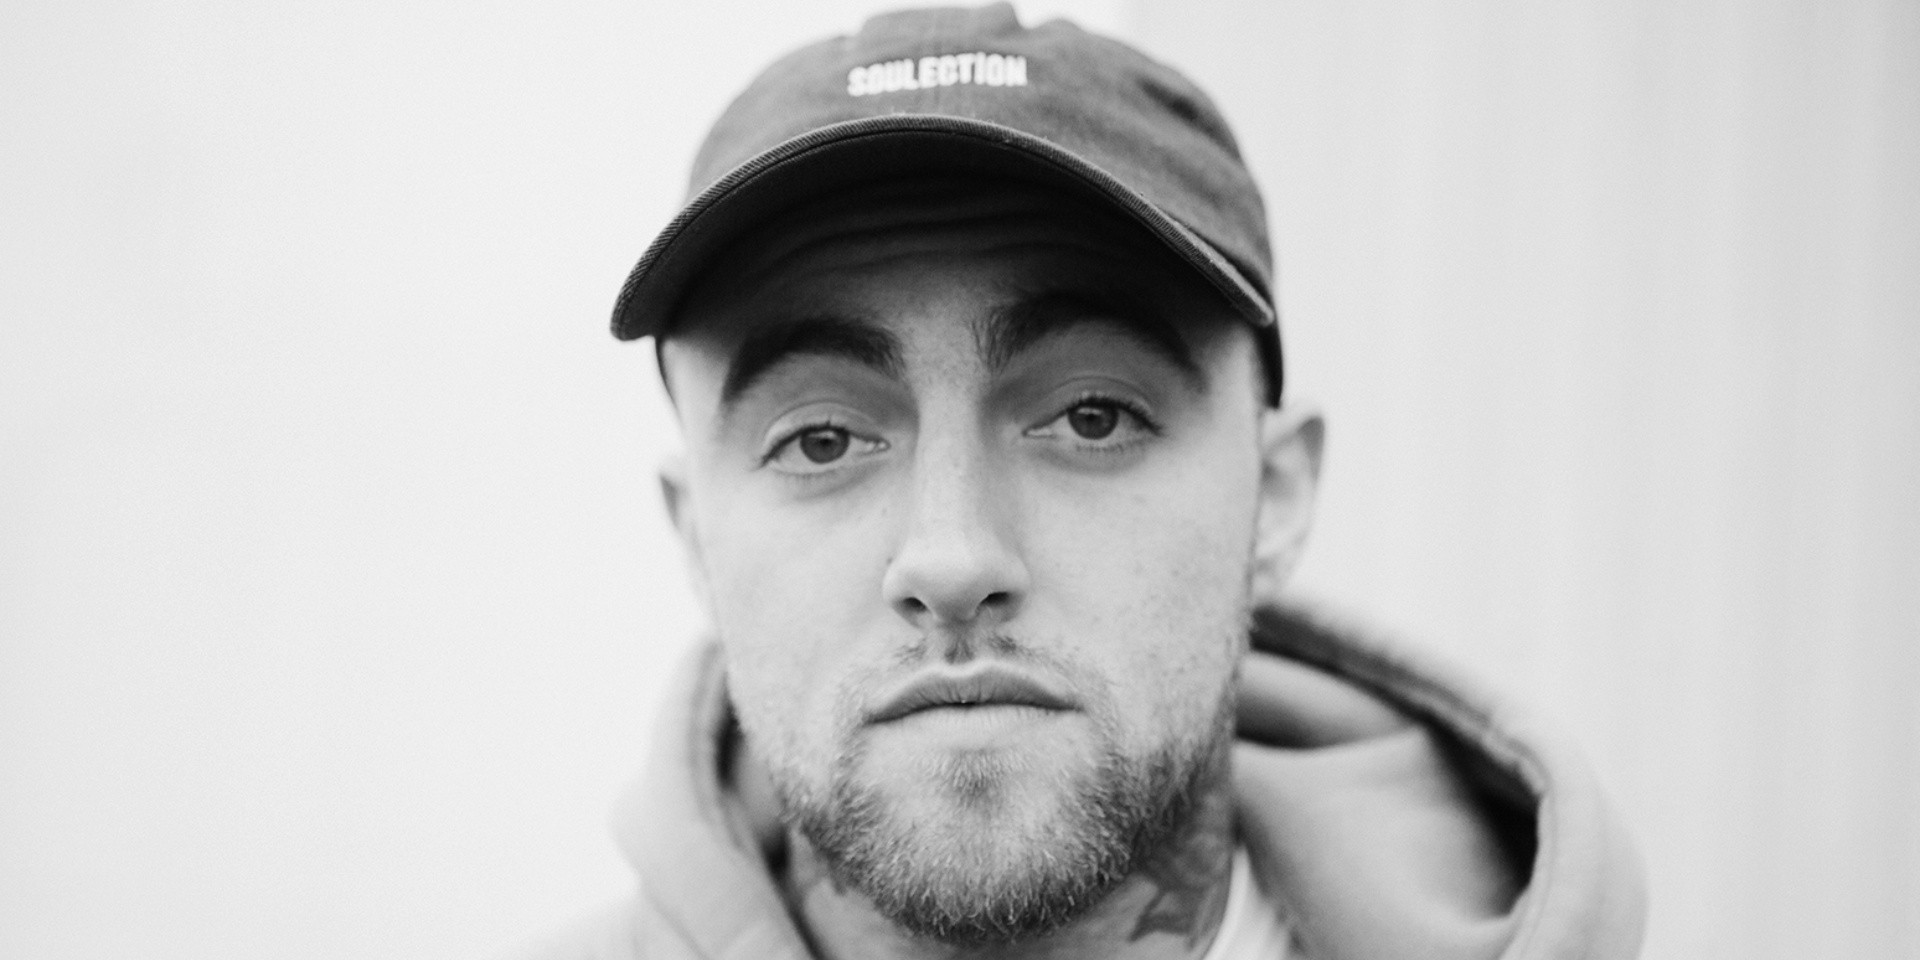 Mac Miller's parents to accept any posthumous honours at the Grammys in person